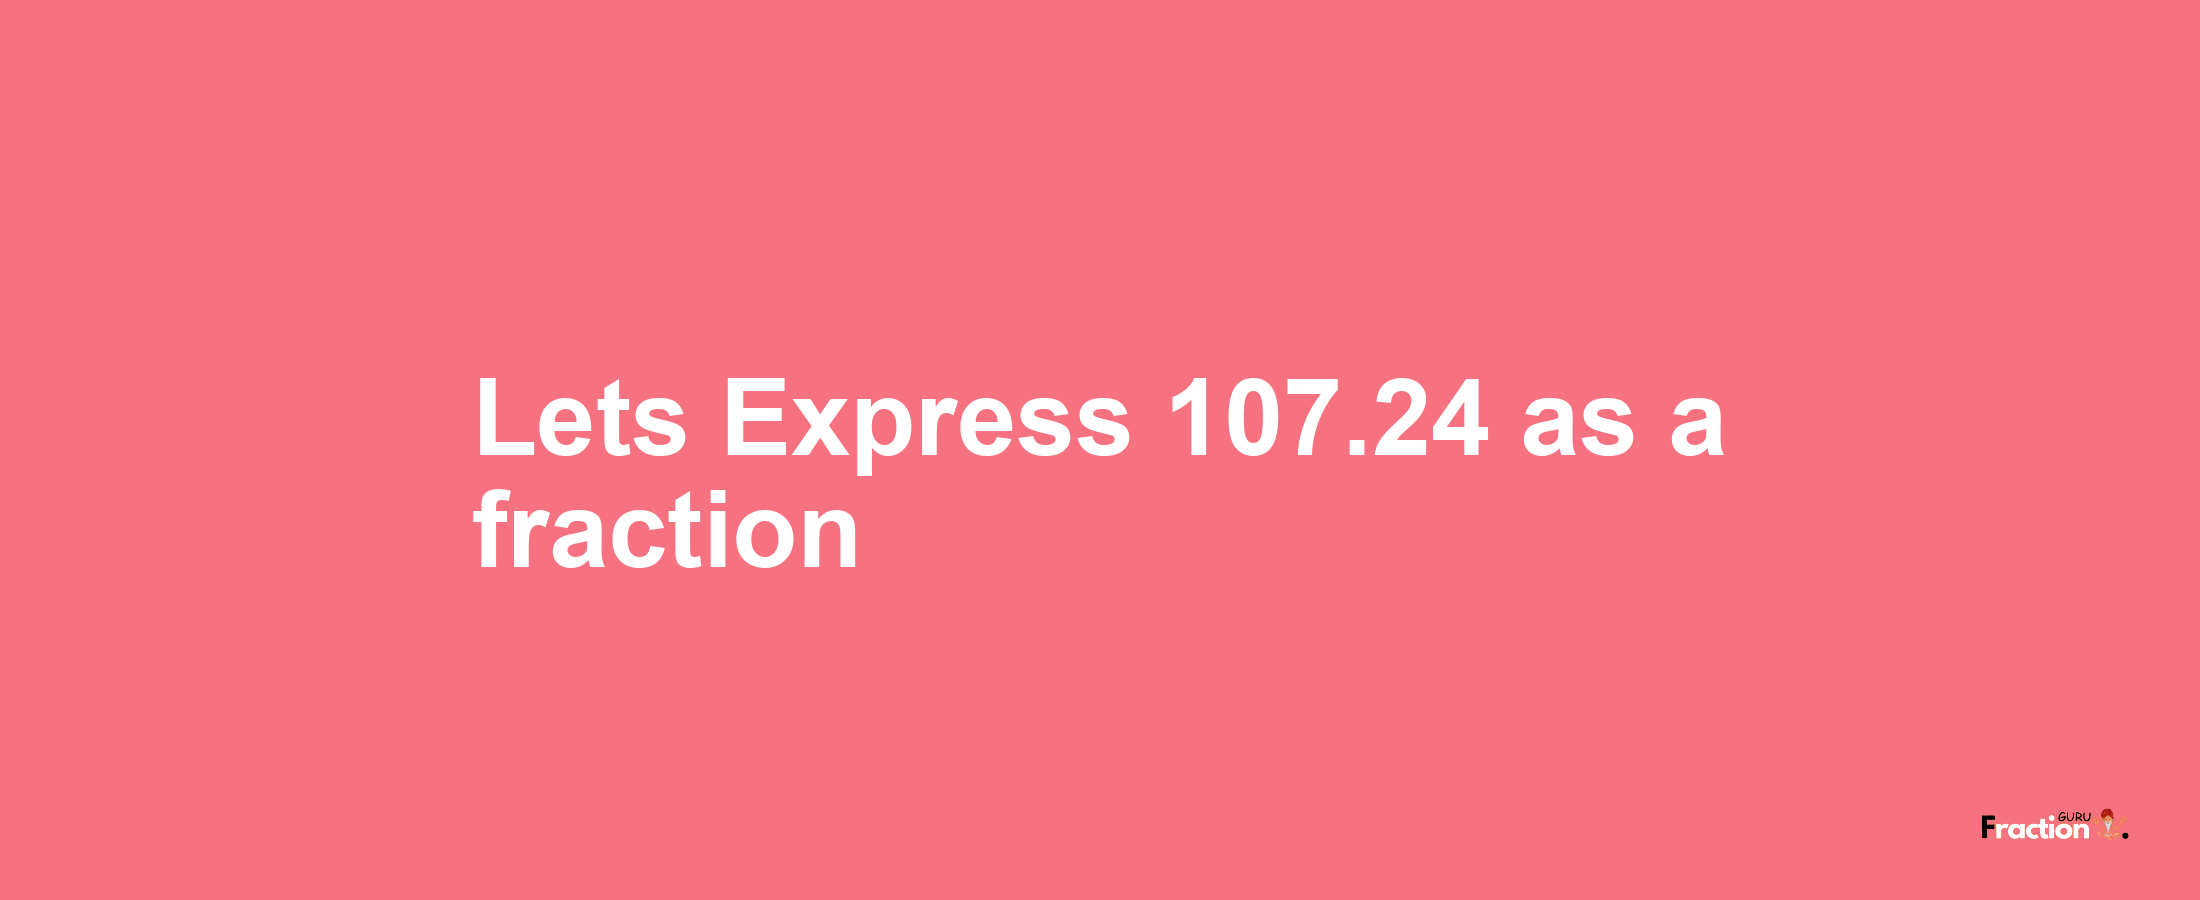 Lets Express 107.24 as afraction